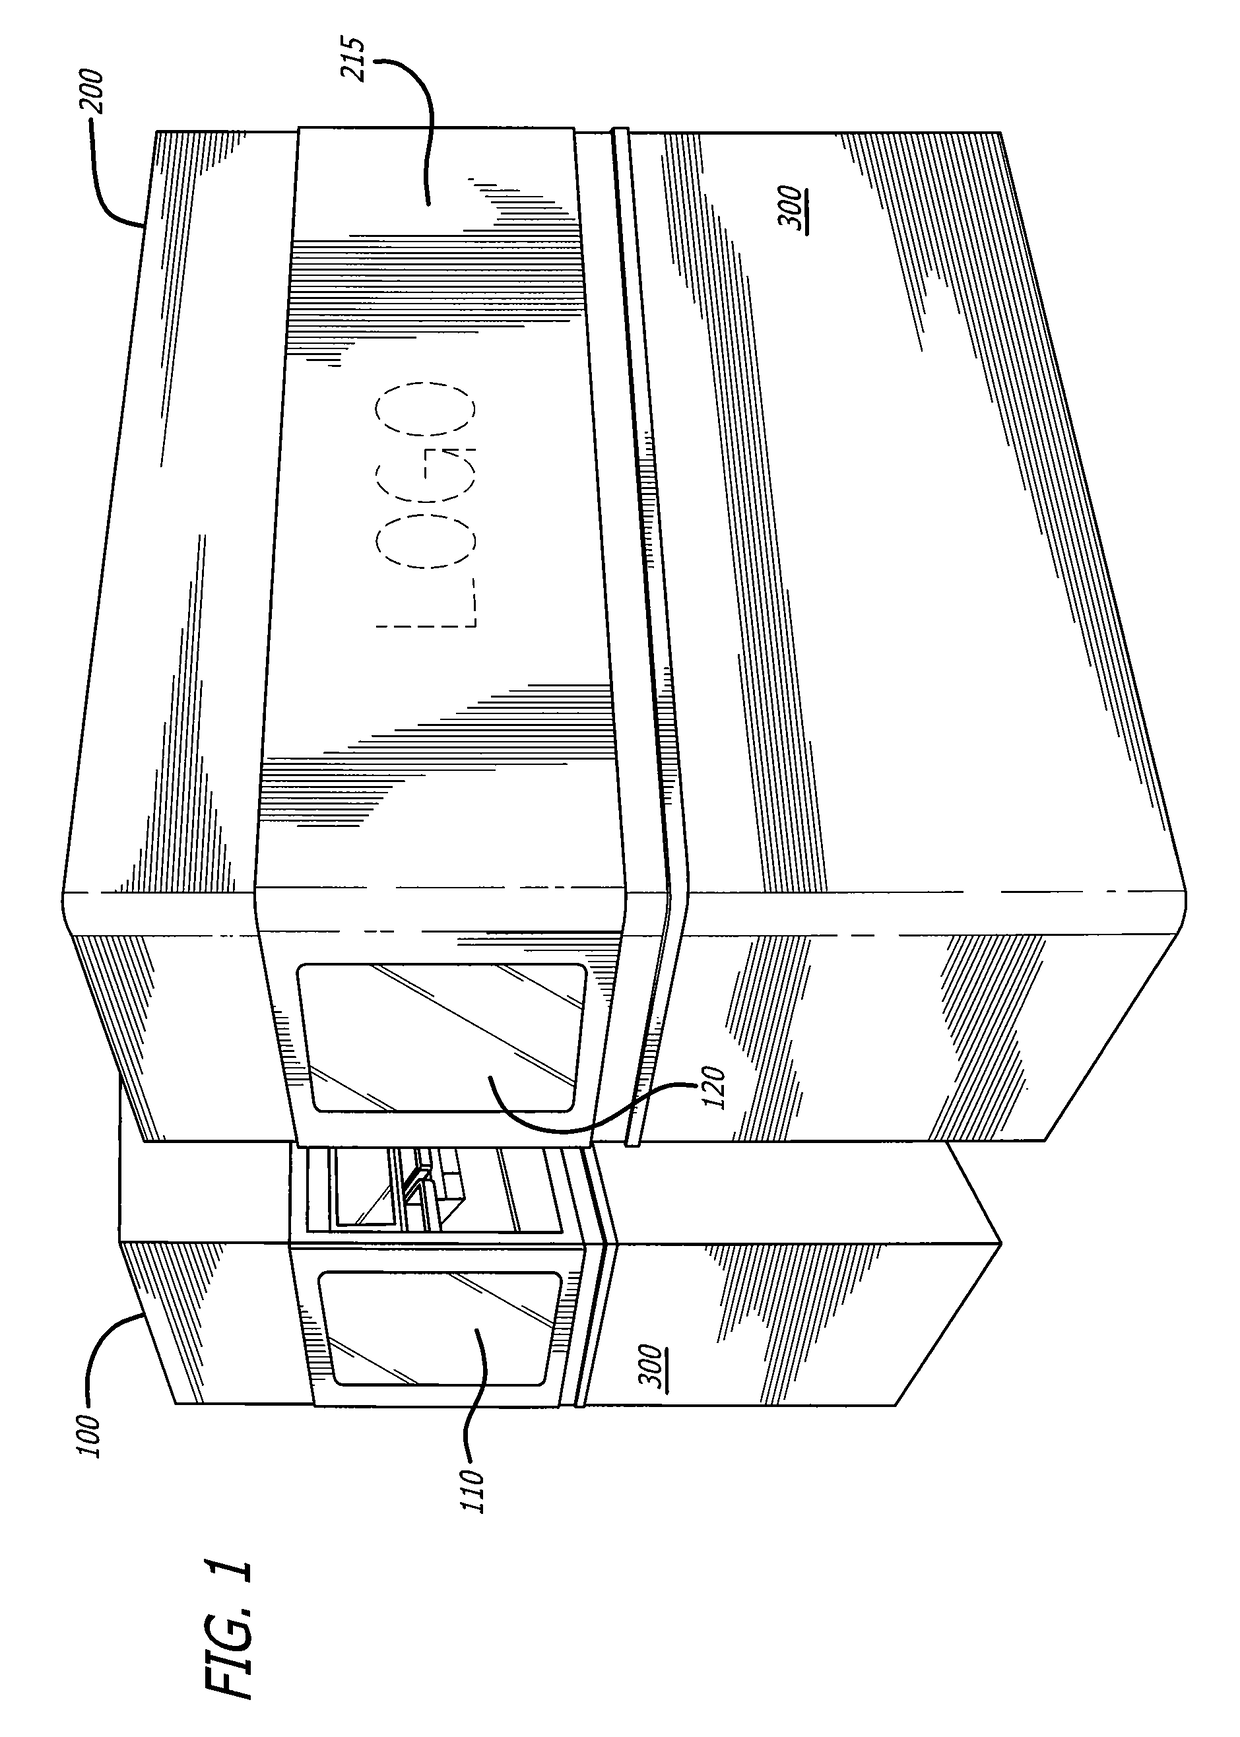 Acoustically and thermally insulated galley shell